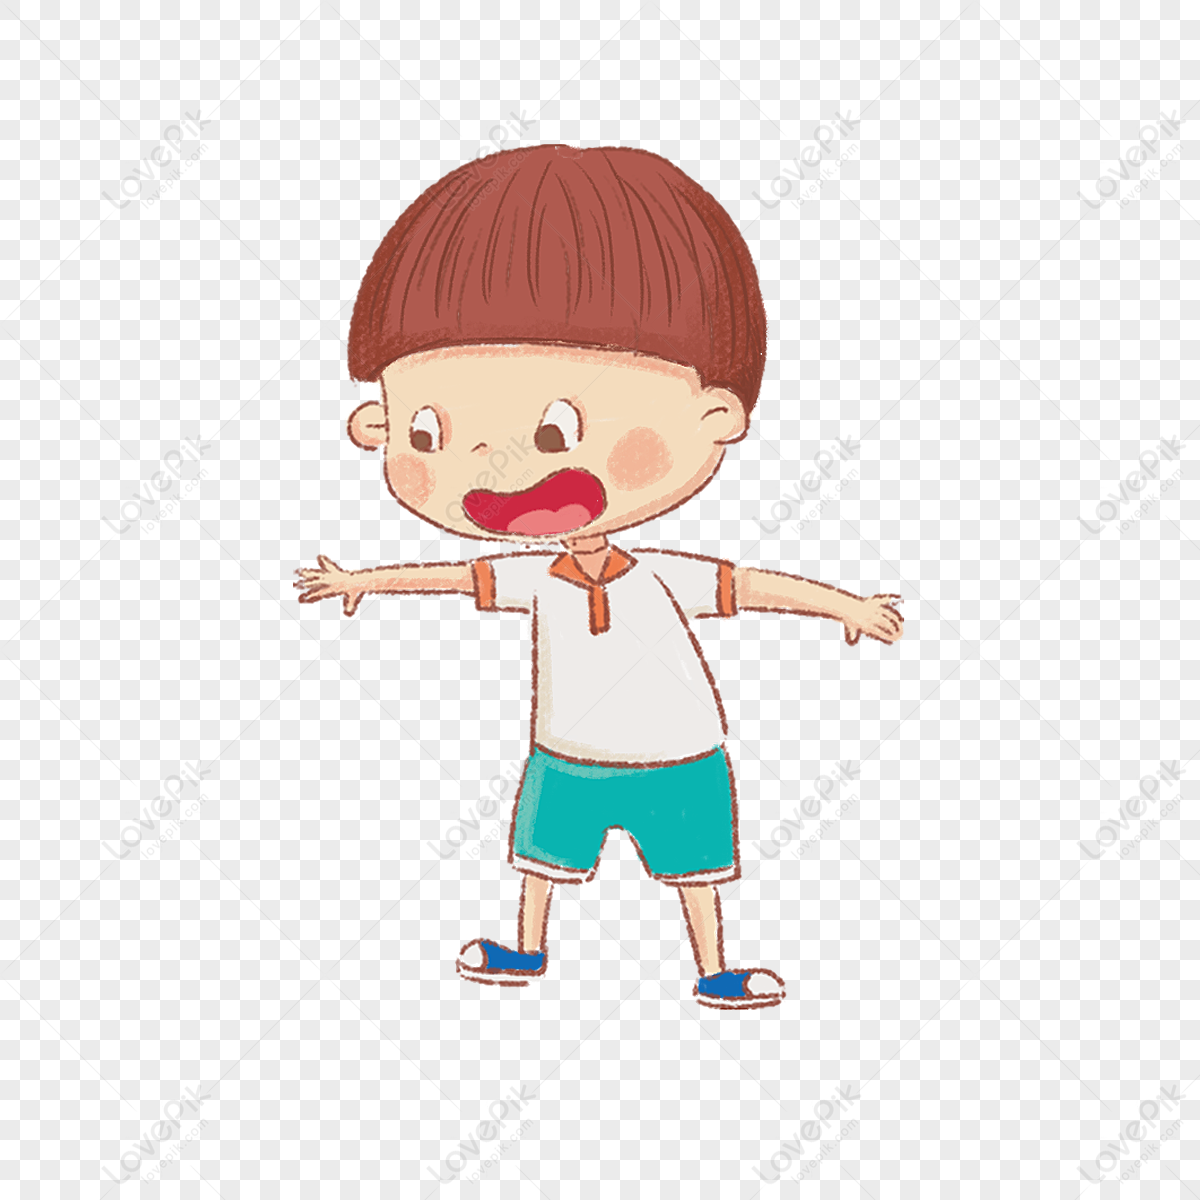 Surprised Boy PNG White Transparent And Clipart Image For Free Download -  Lovepik | 400180272